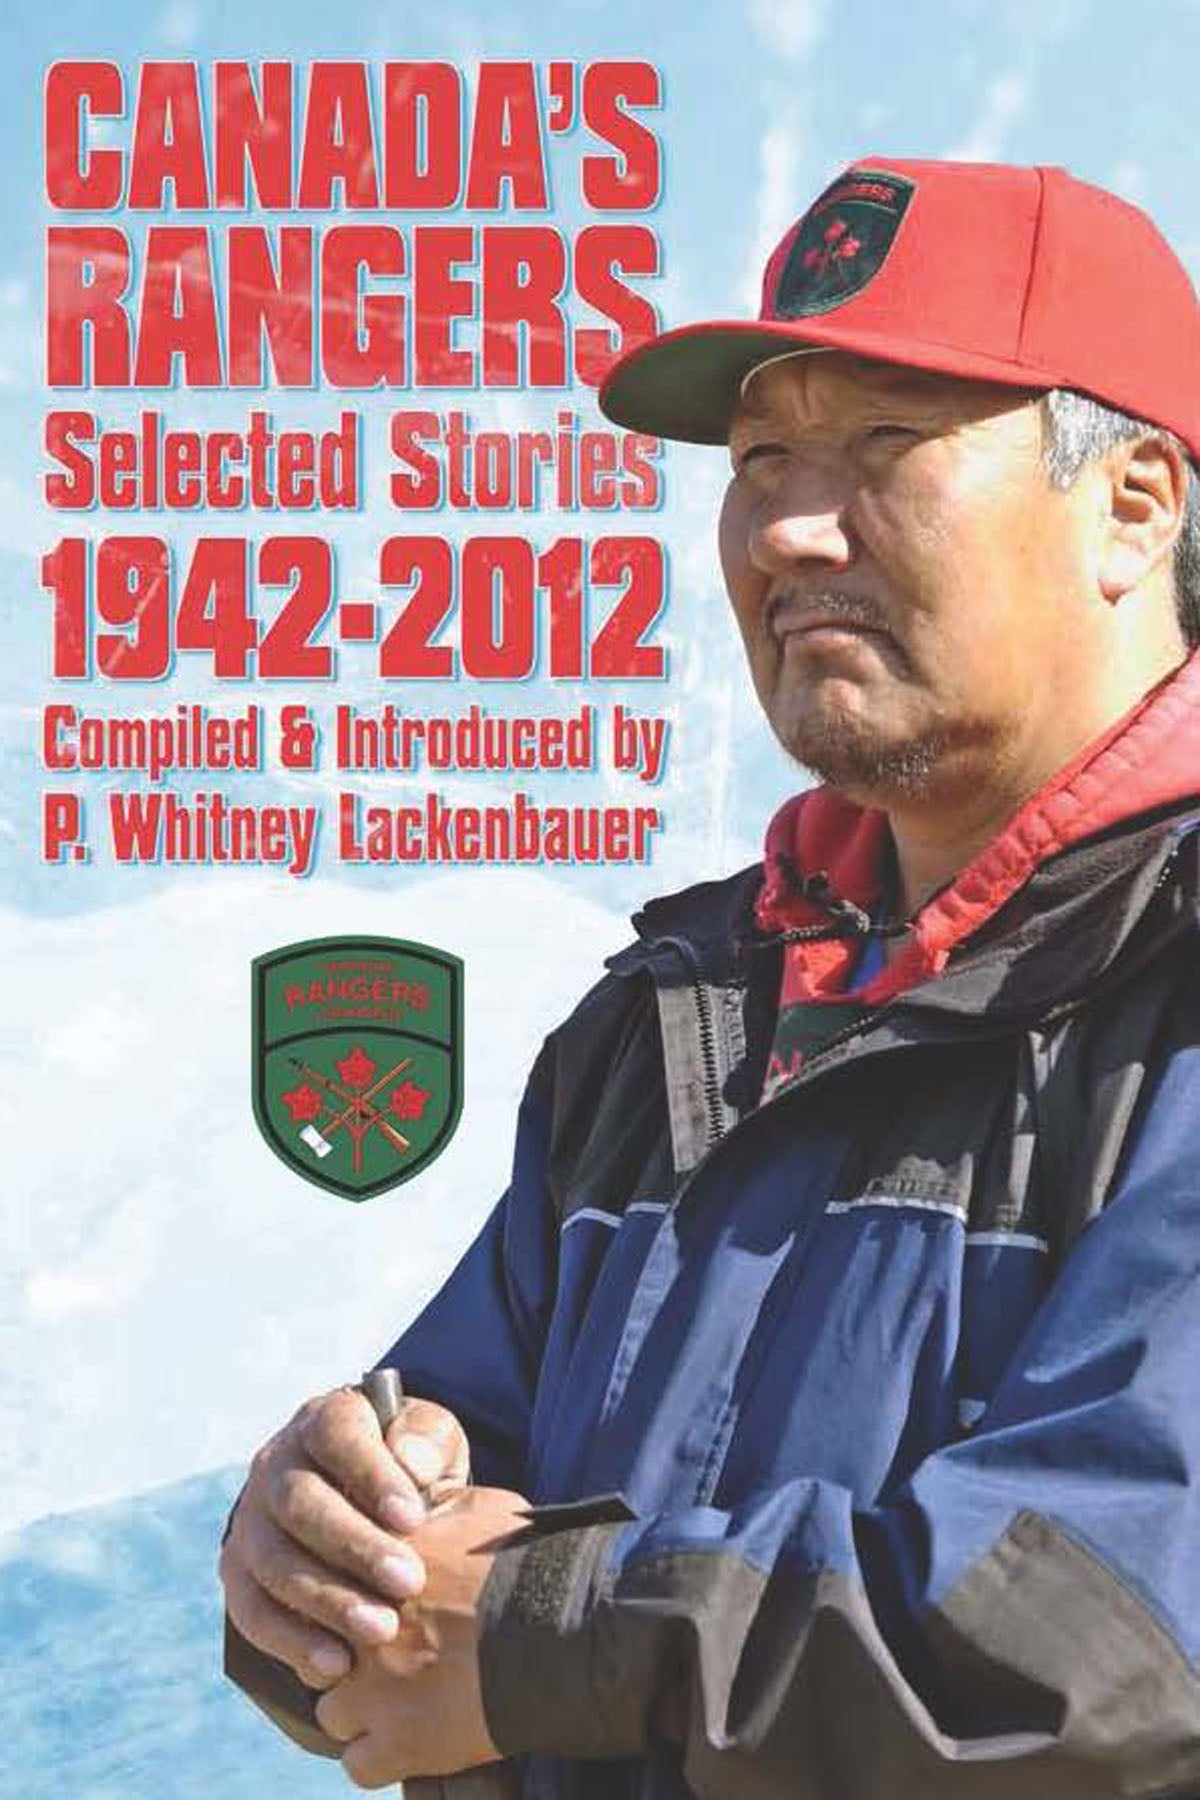 Canada's Rangers Selected Stories book cover